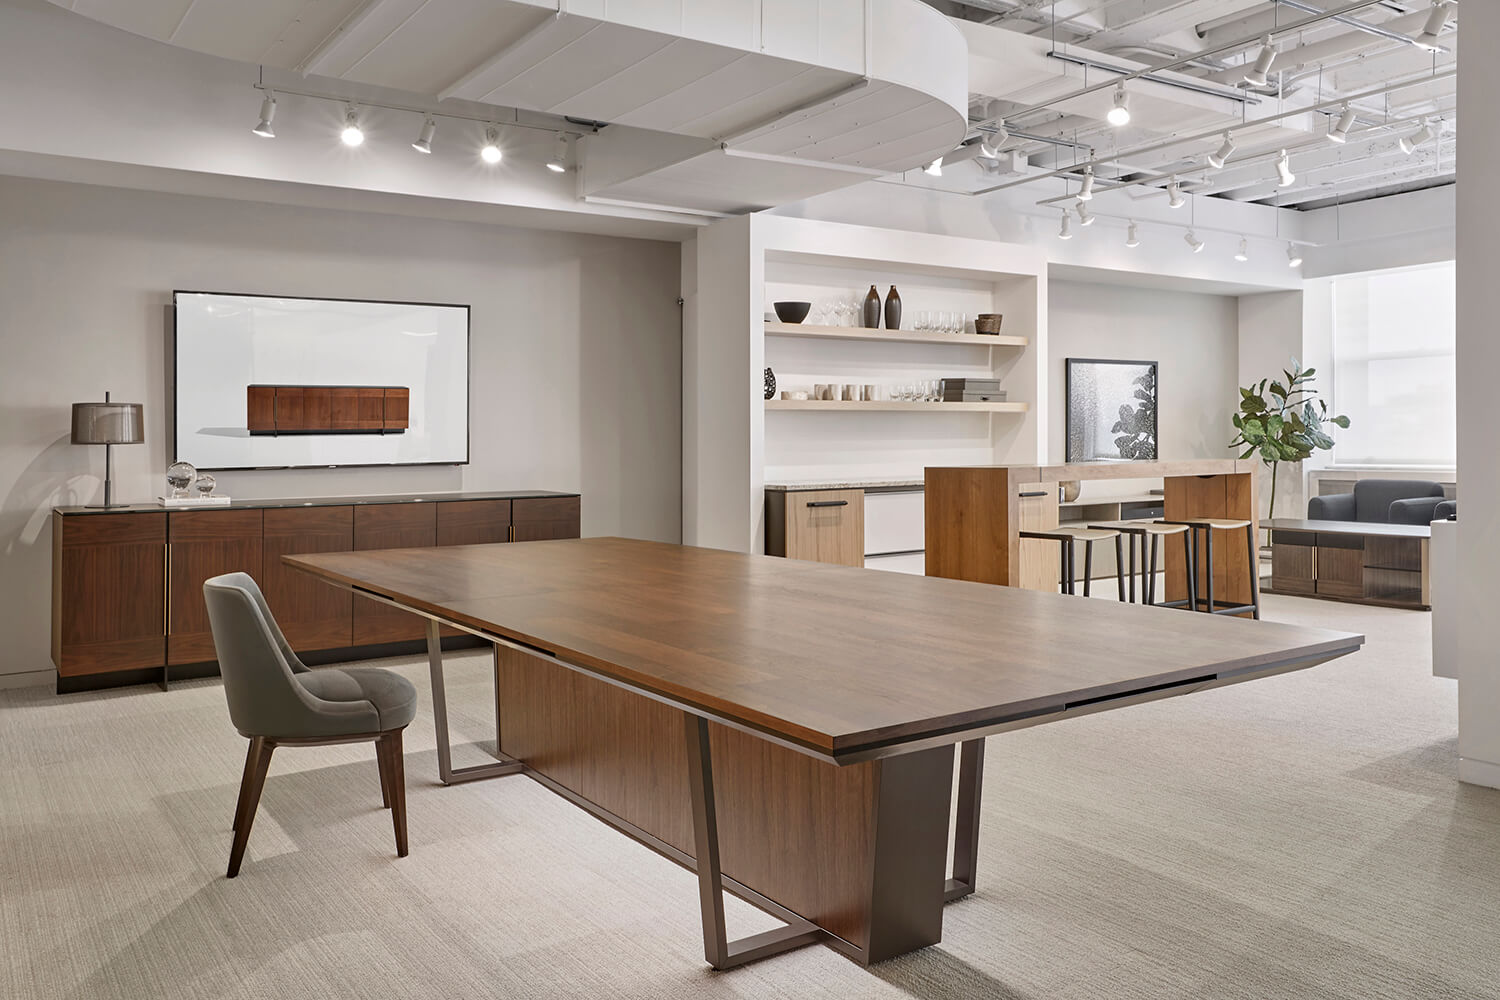 crossbeam-conference-table-custom-finish-on-planked-walnut-planked-veneer-top-a8010-aged-bronze-base-custom-finish-on-walnut-veneer-center-base-panels-chicago-showroom_lg.jpg feature image